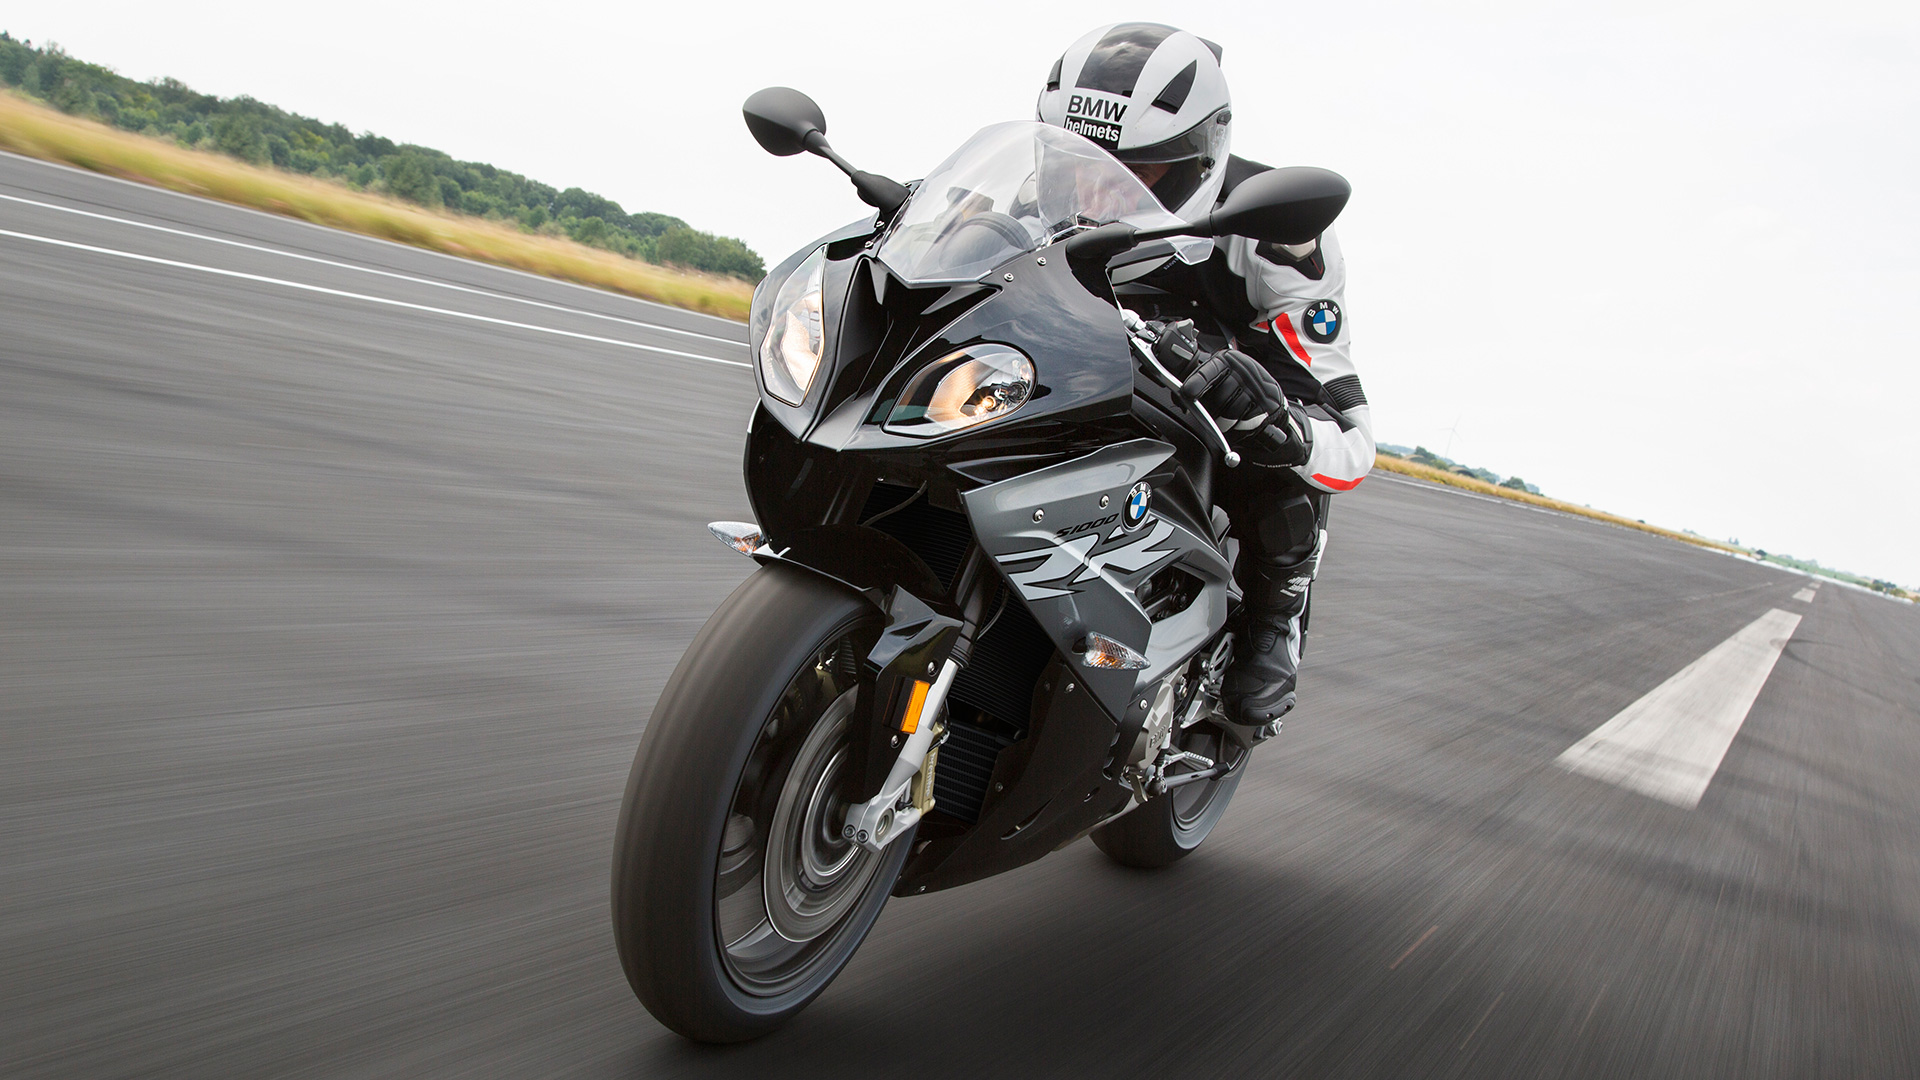 BMW S1000RR launched in India, prices start from 20.25 lakh - Overdrive